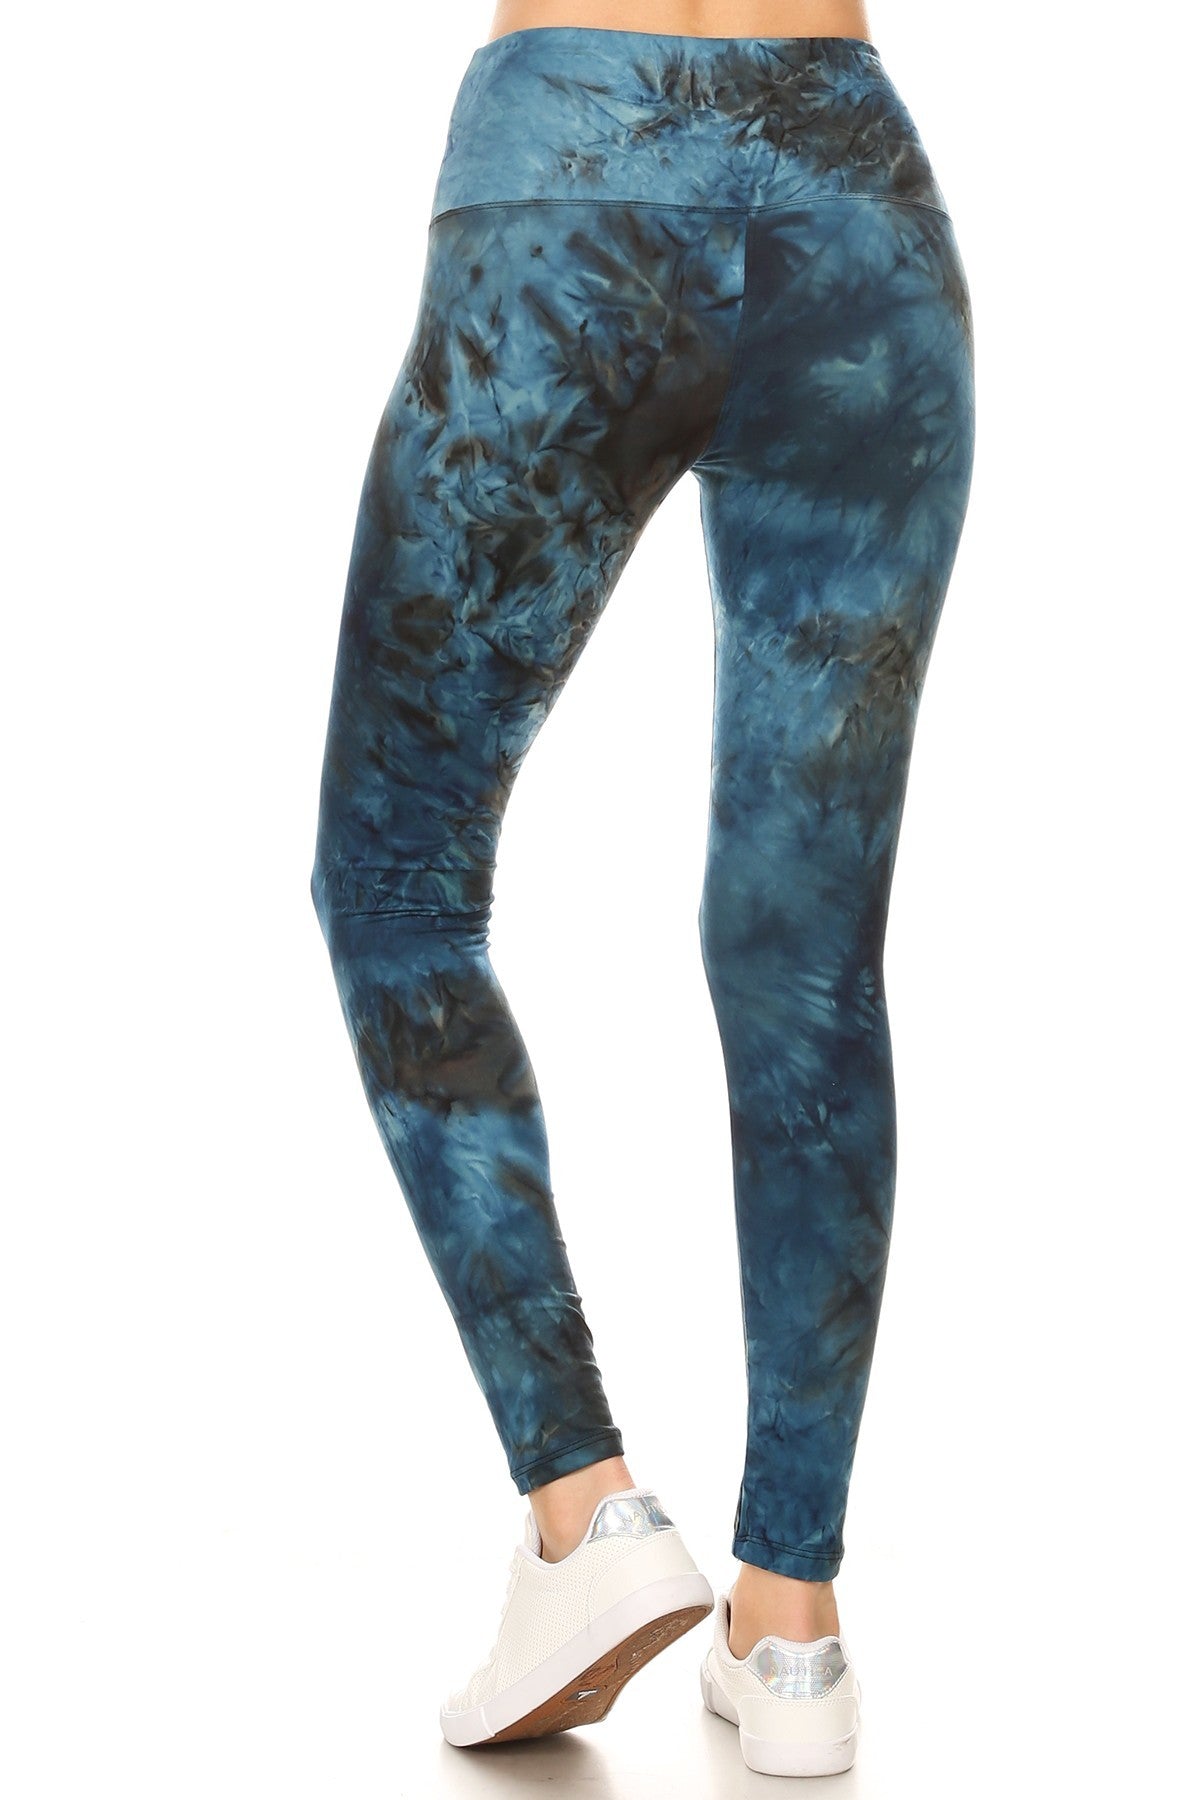 5-inch Long Yoga Style Banded Lined Tie Dye Printed Knit Legging With High Waist